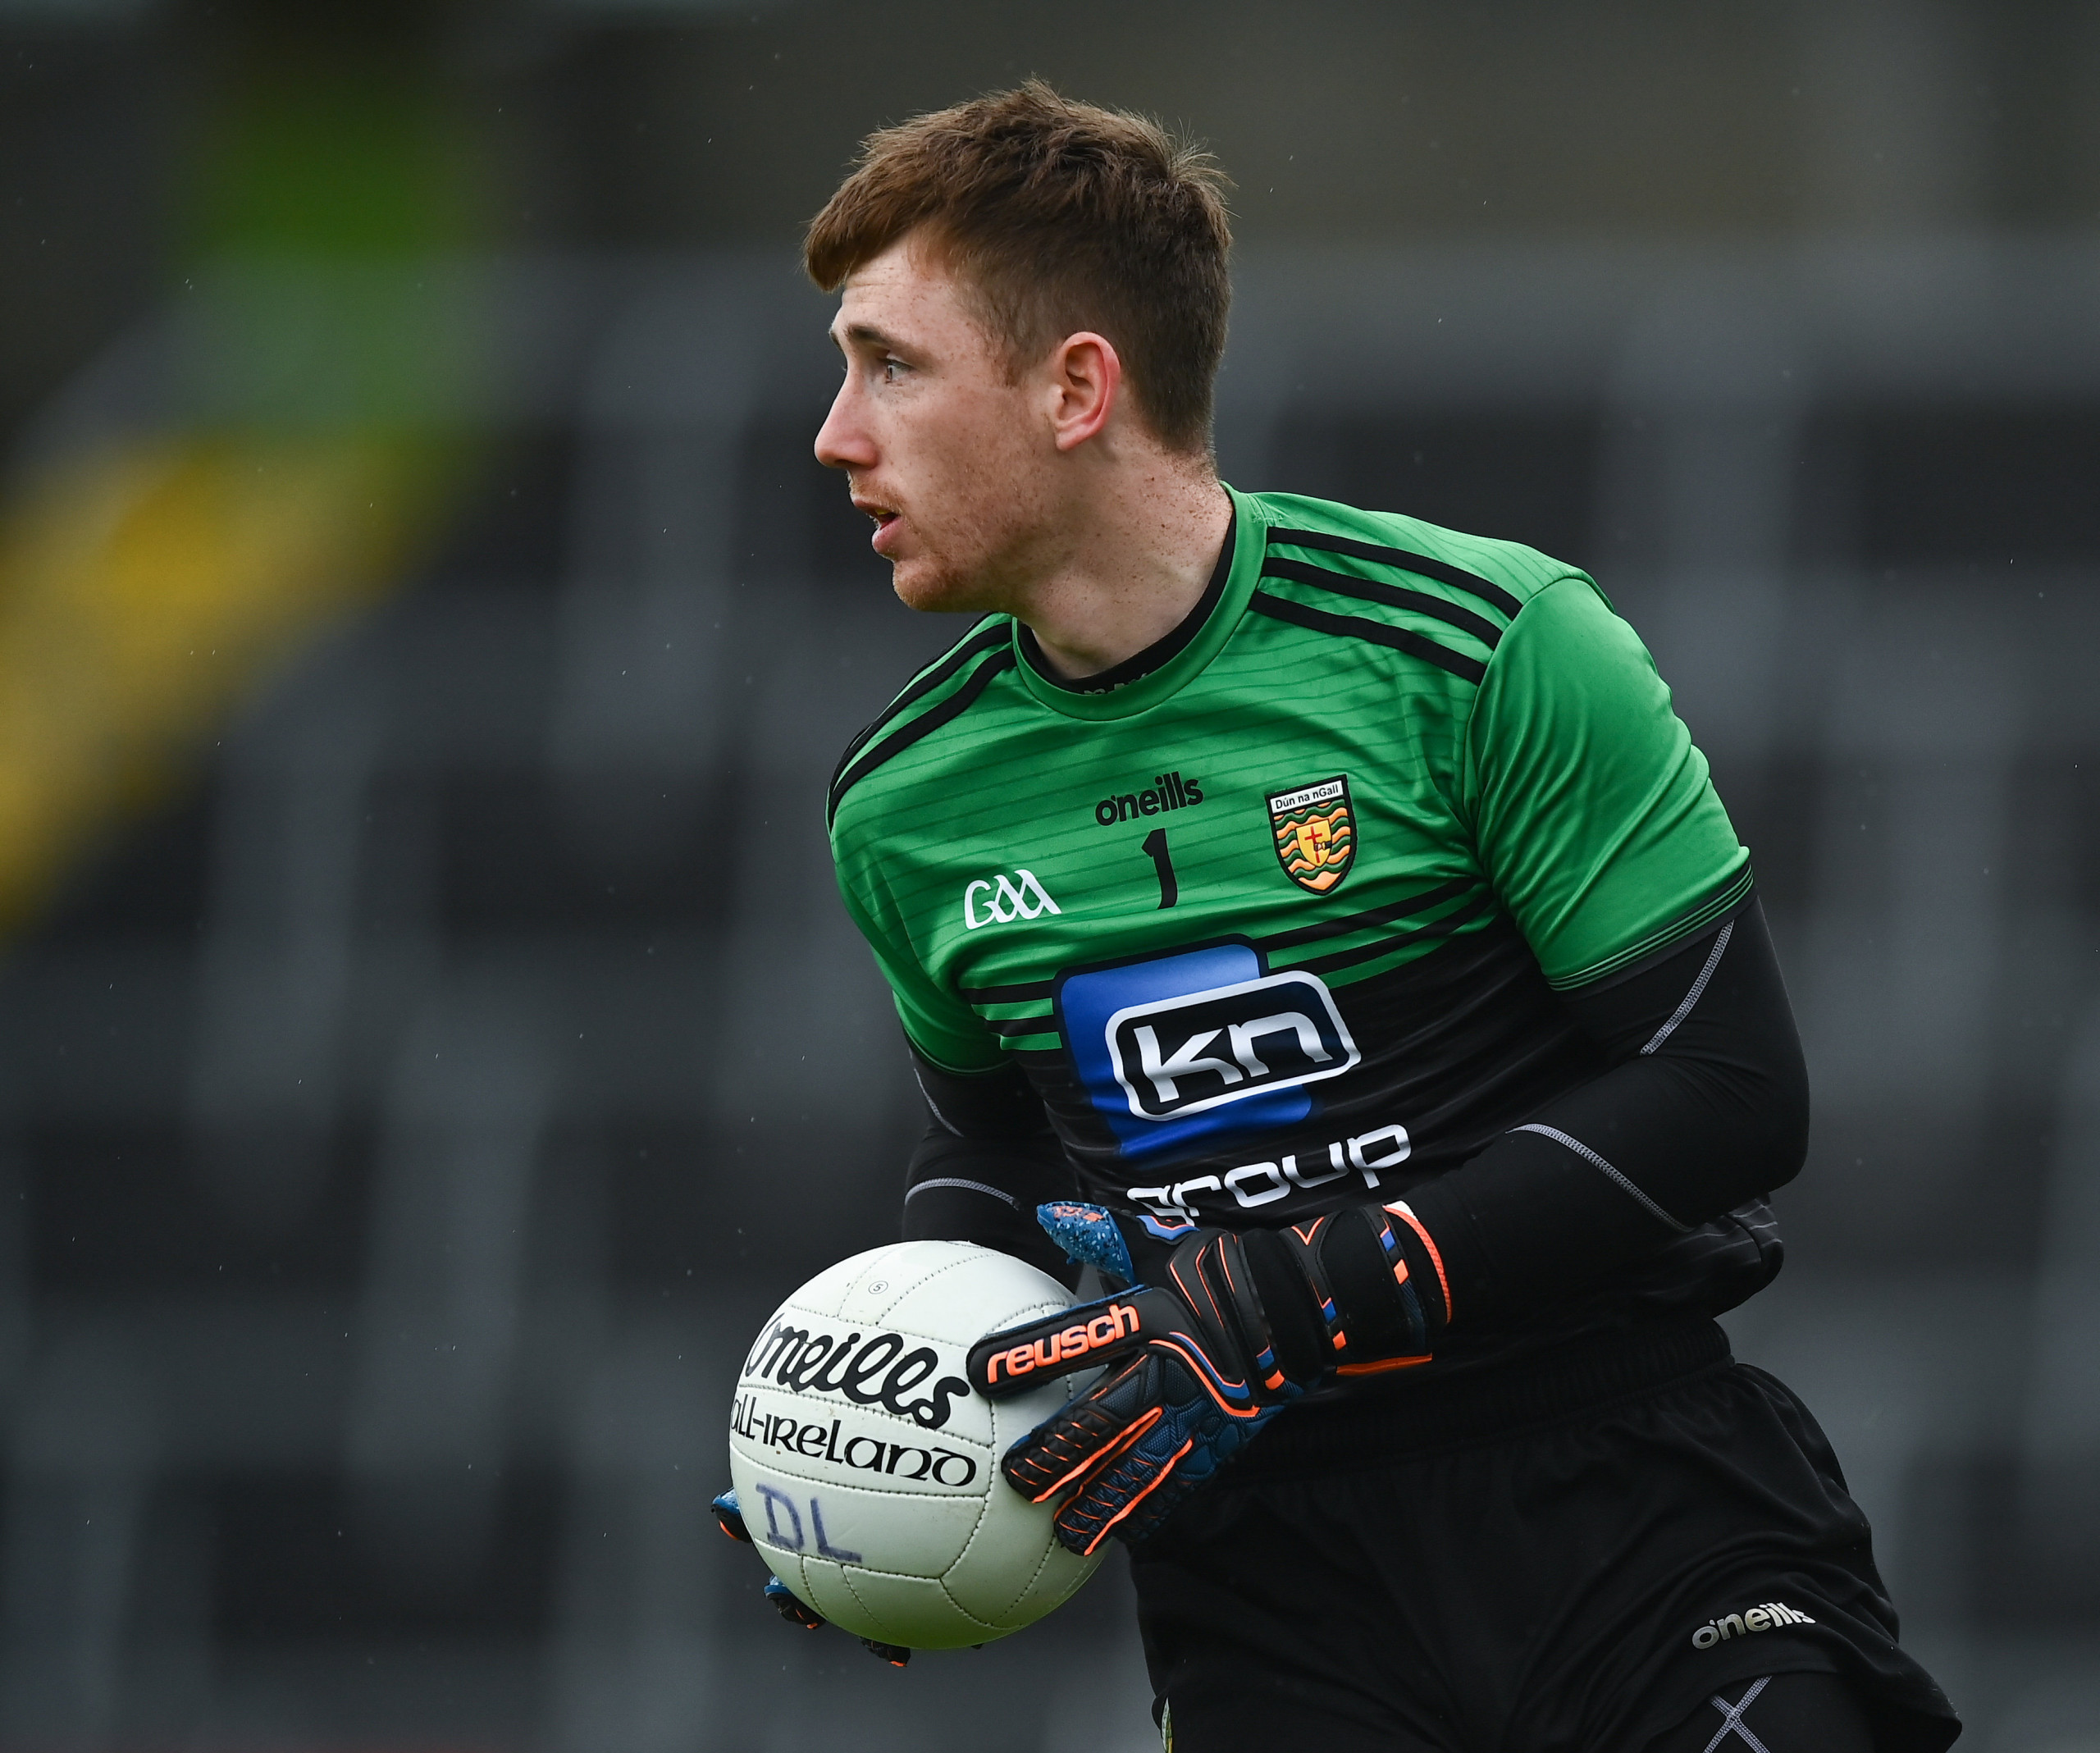 FEATURE: Donegal’s Patton taking every chance that comes his way